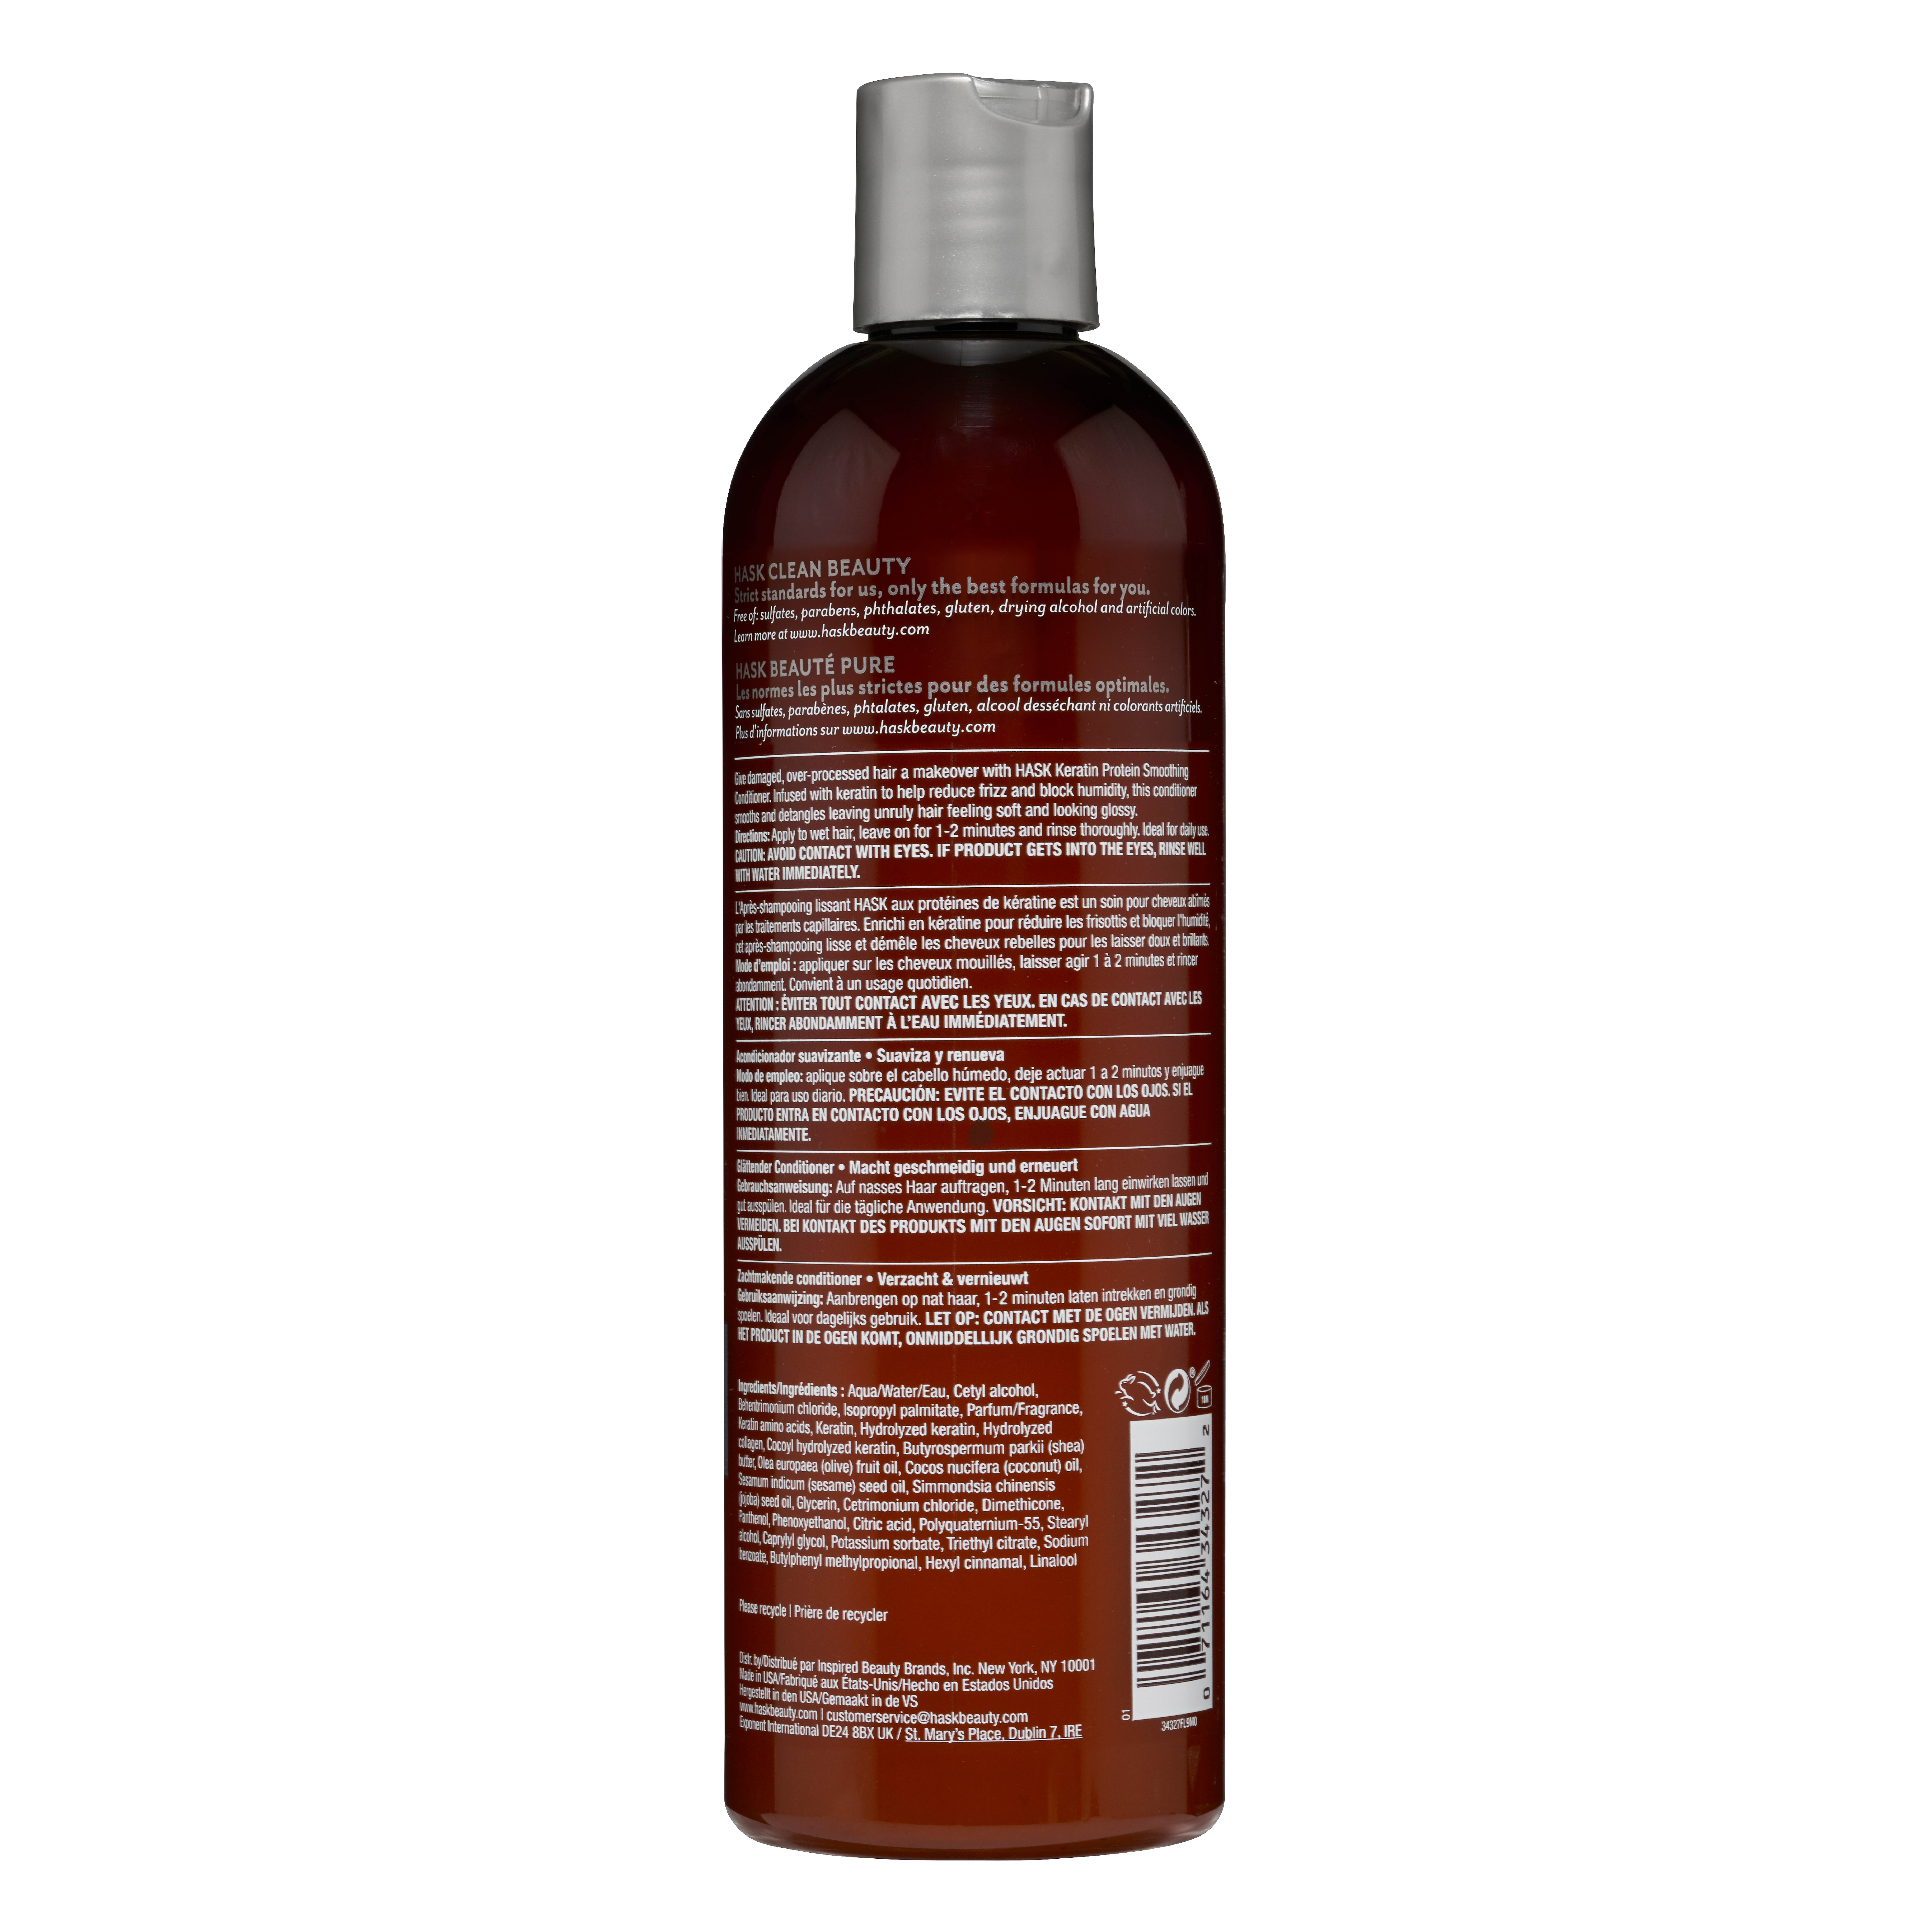 Hask Keratin Protein Frizz Control Shine Enhancing Smoothing Daily Conditioner with Fruity Floral Scent, 12 fl oz - image 2 of 14